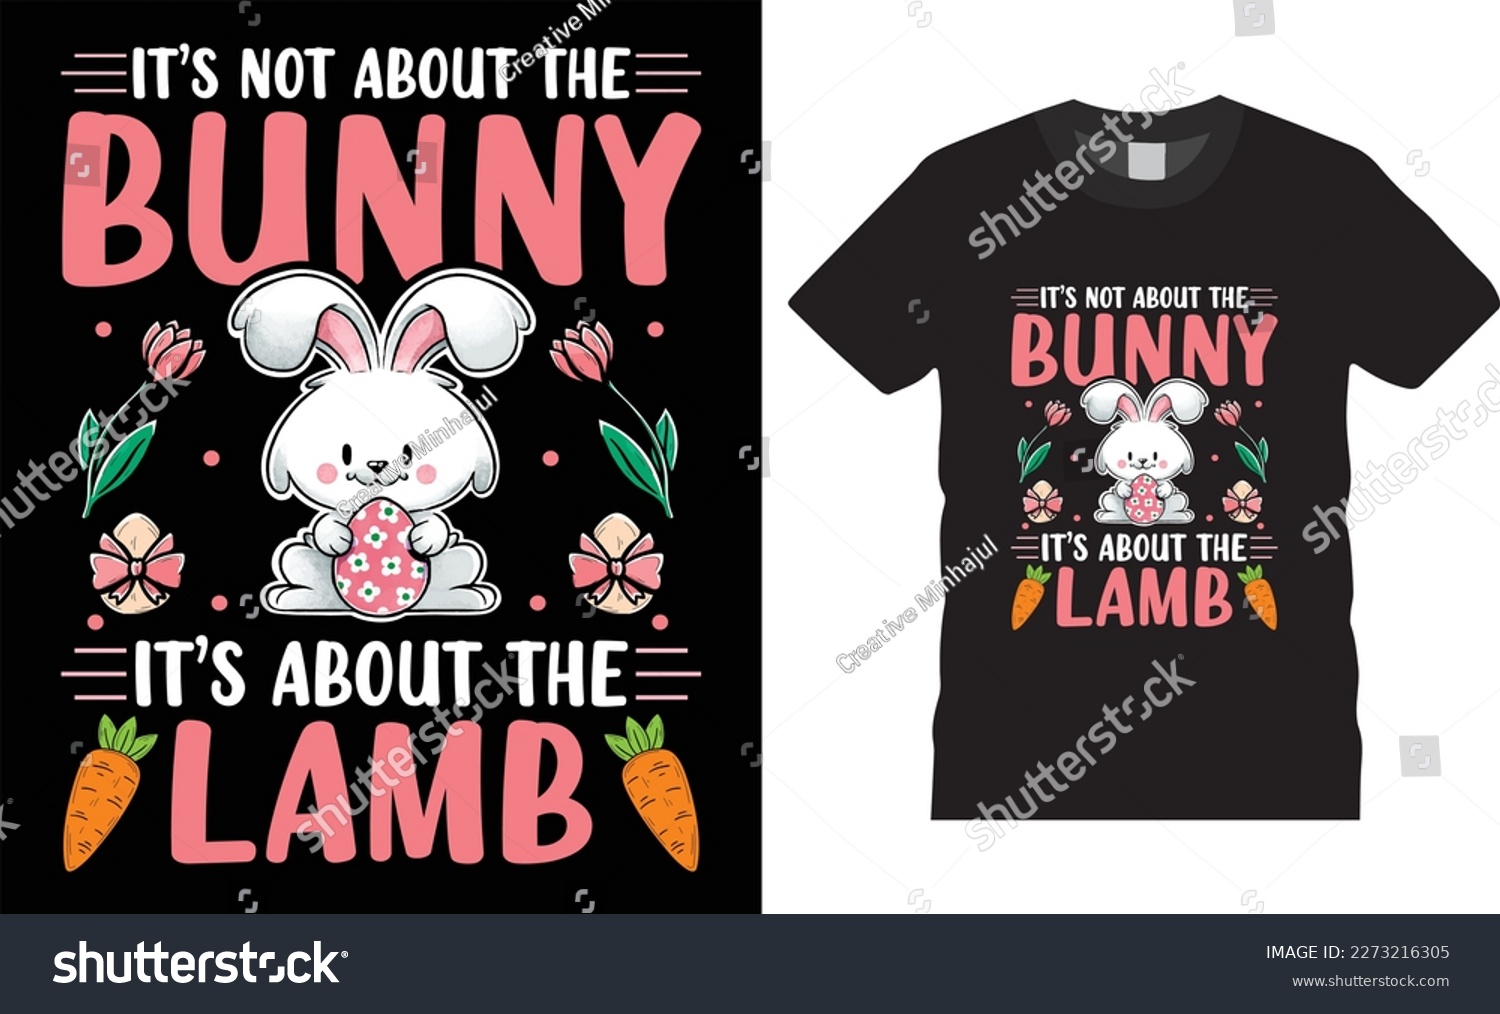 SVG of Happy easter rabbit, bunny tshirt vector design template.It’s not about  the bunny It s about the lamb t-shirt design.Ready to print for apparel, poster, mug and greeting plate illustration svg